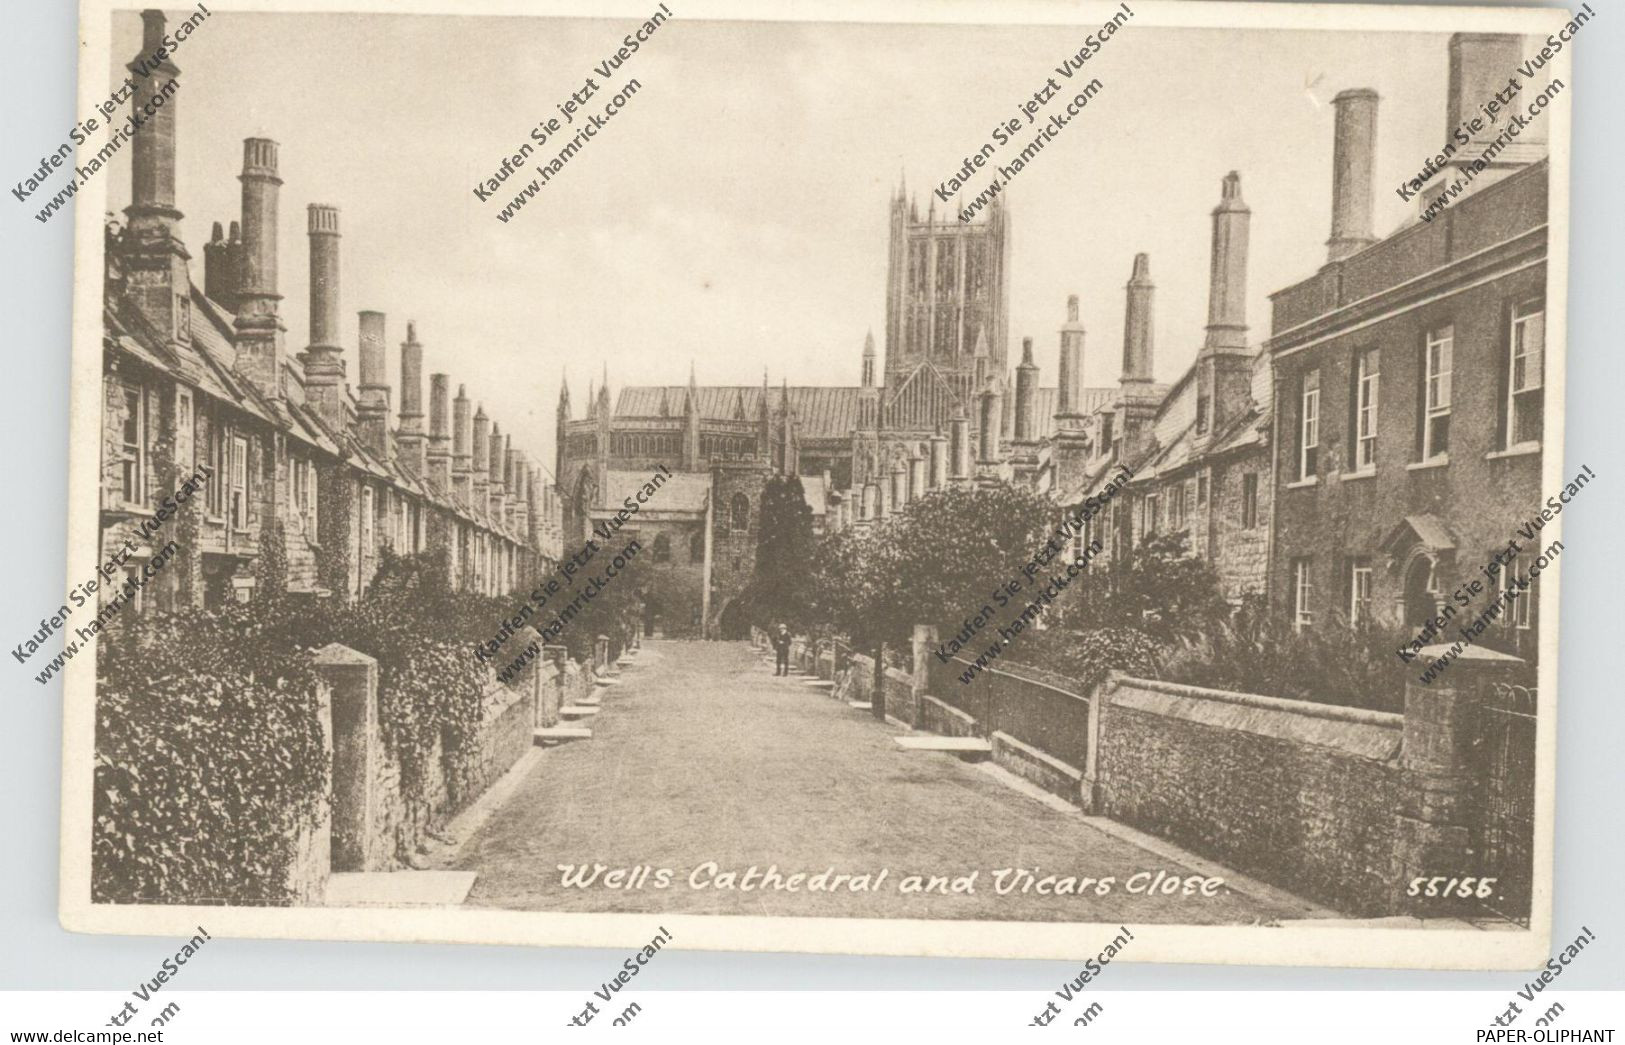 UK - SOMERSET - WELLS, Vicars Close, Cathedral, Frith & Co. - Wells